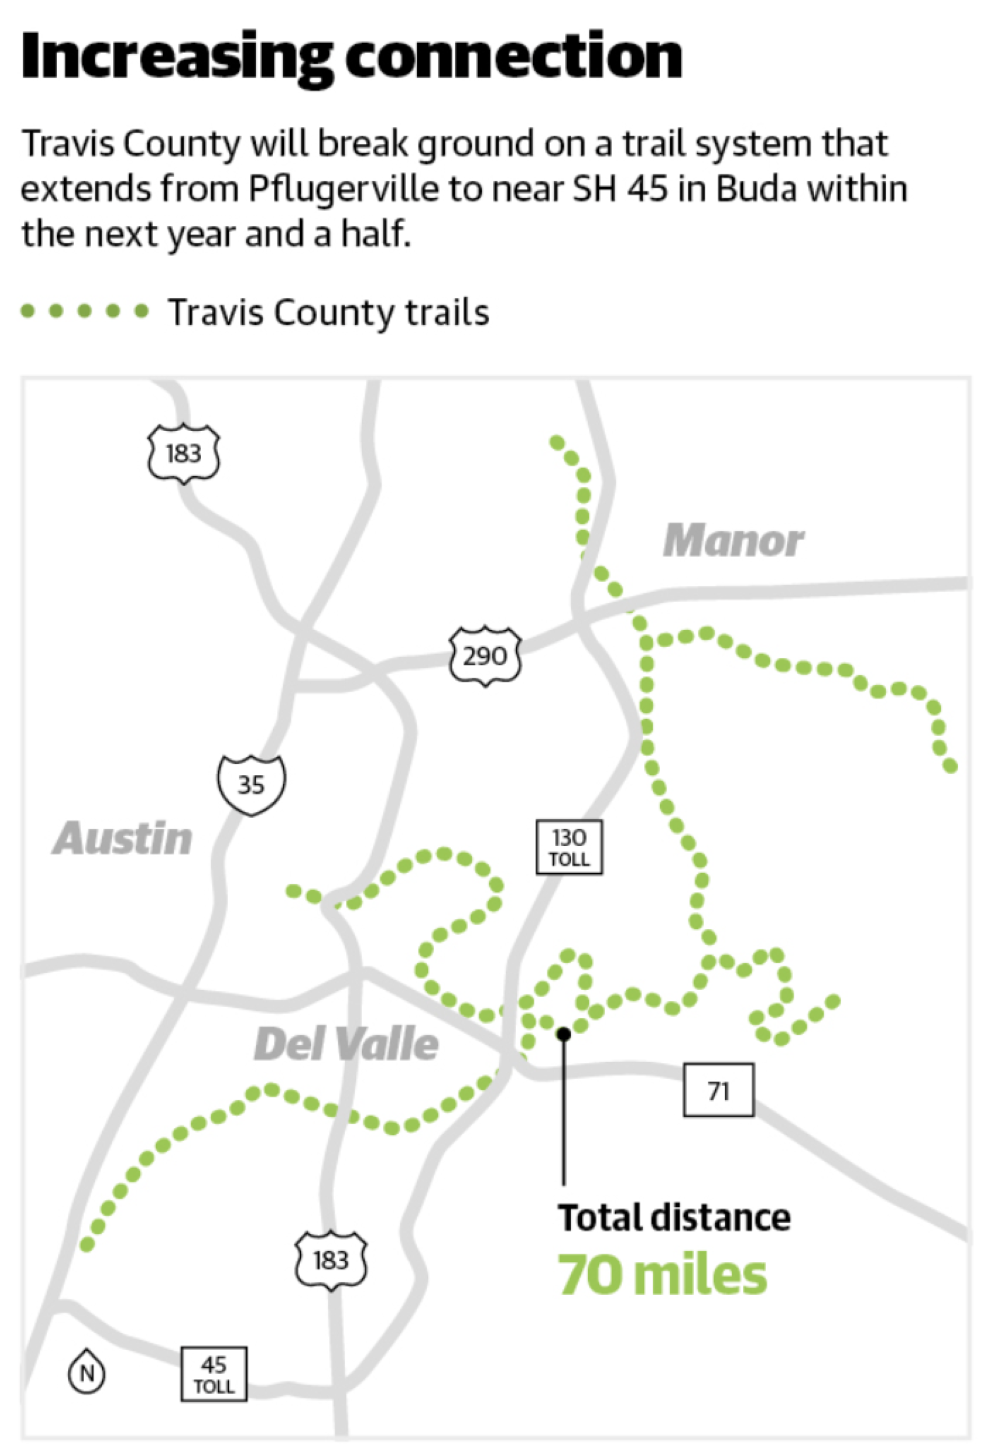 Travis County will break ground on a trail system that extends from Pflugerville to near SH 45 in Buda within the next year and a half. (Travis County Parks Foundation/Community Impact)